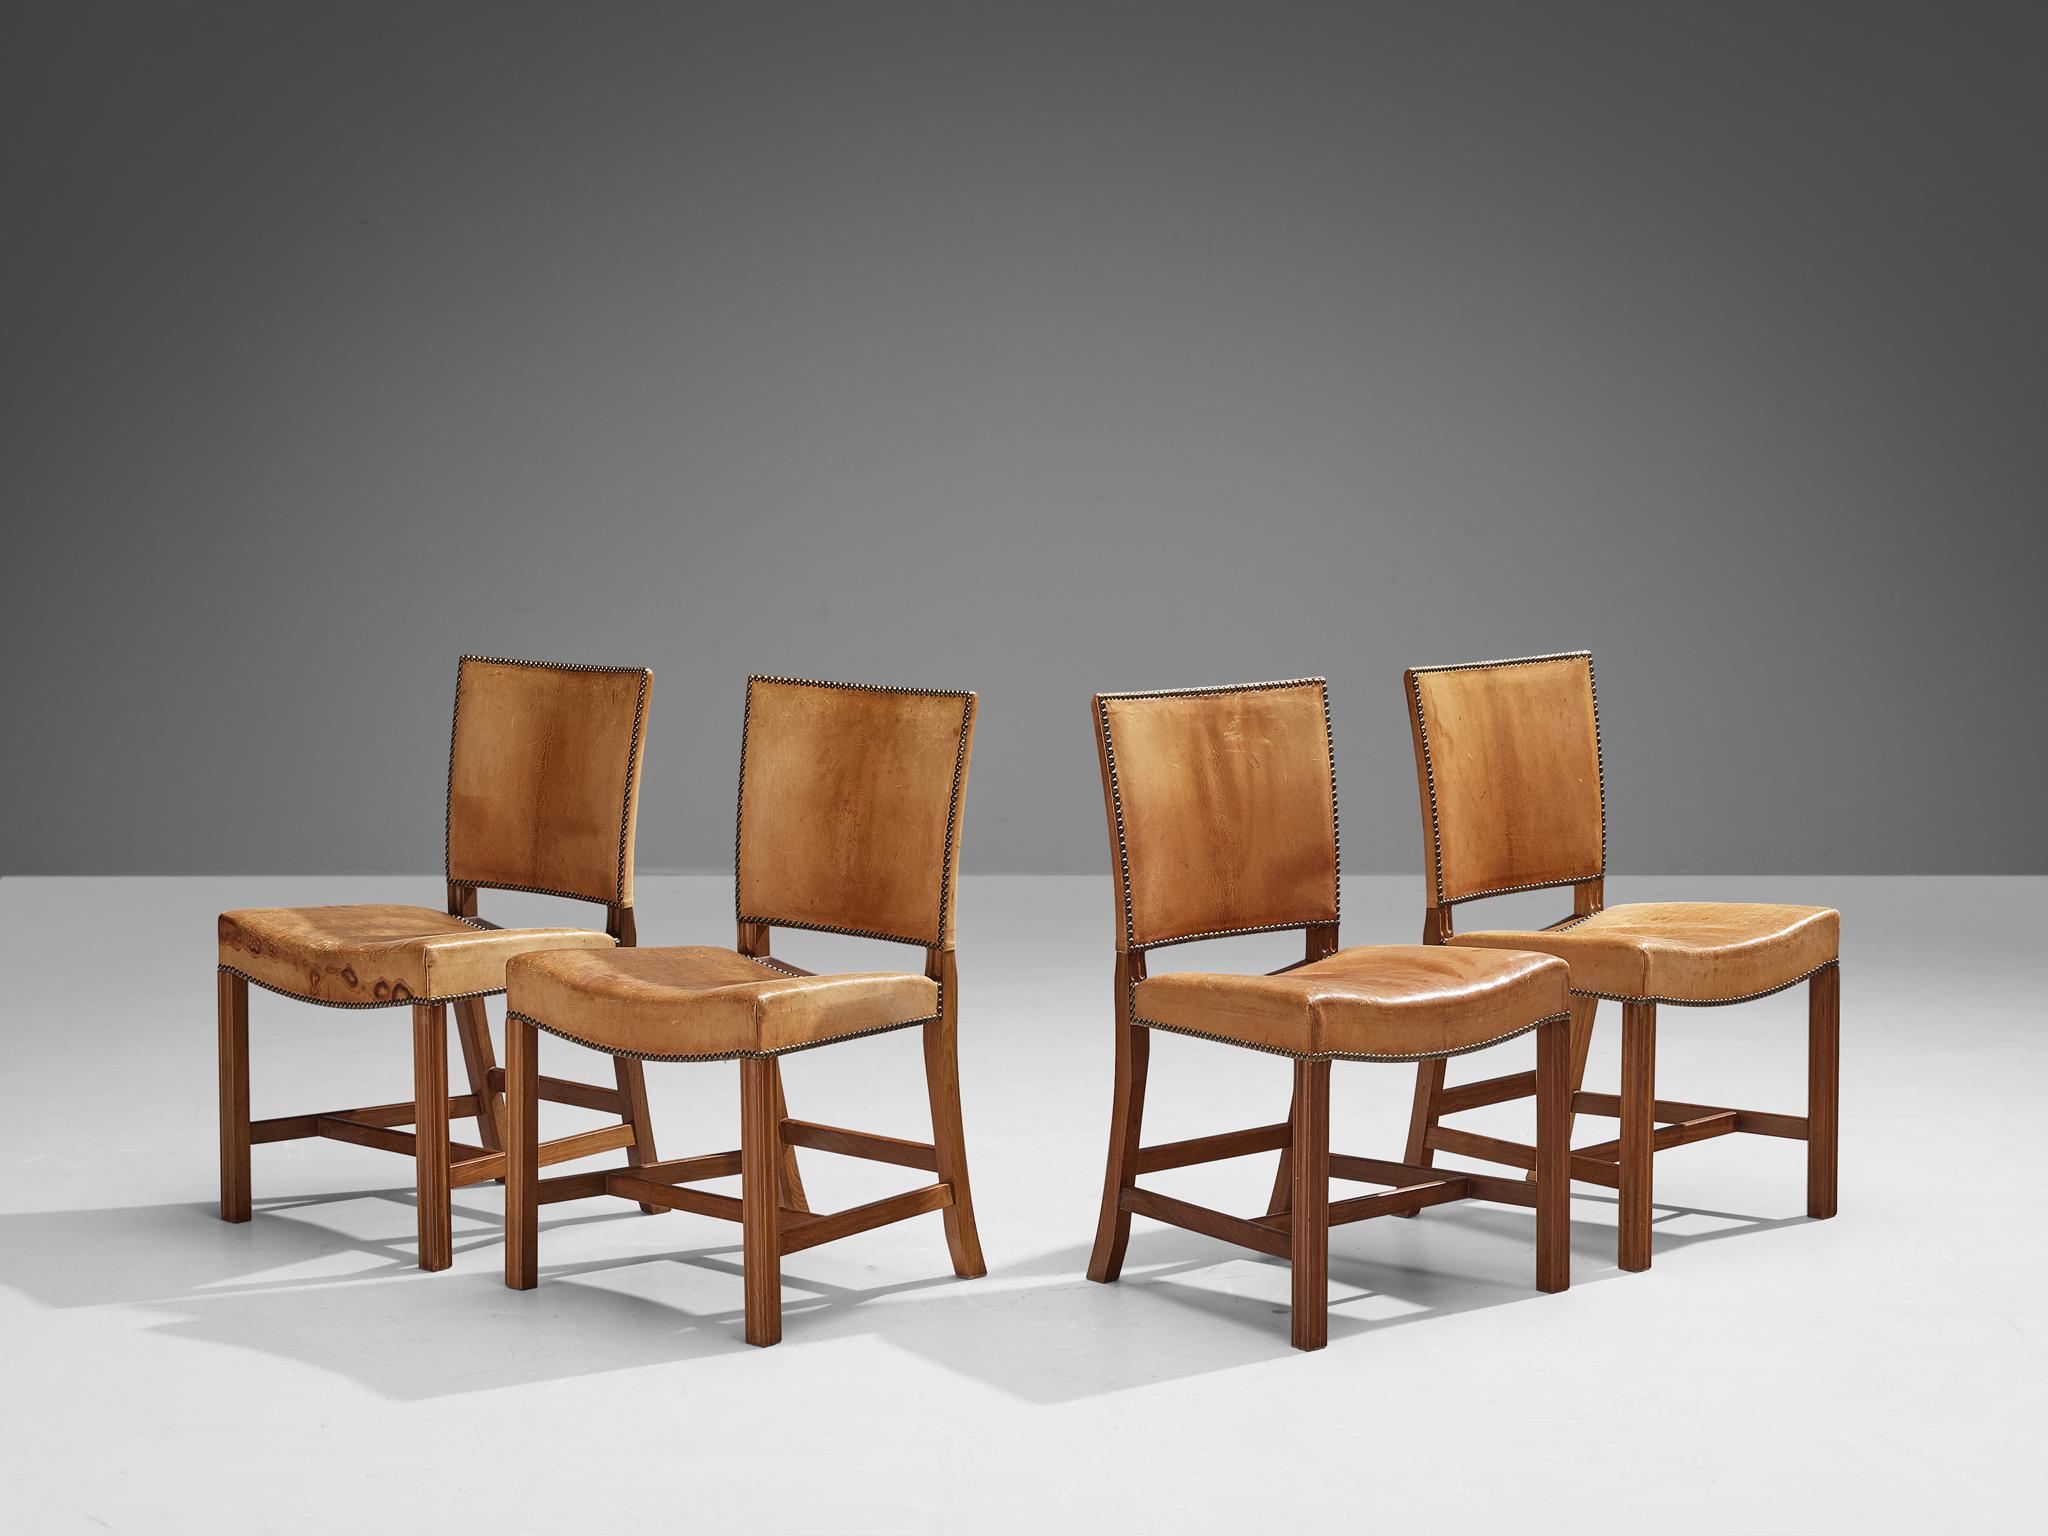 Kaare Klint for Rud Rasmussen, set of four dining chairs, 'The Red Chair', model 4751, original patinated leather, Cuban mahogany, Denmark, designed 1933, manufactured 1930s.

Set of four iconic dining chairs are designed by furniture master Kaare